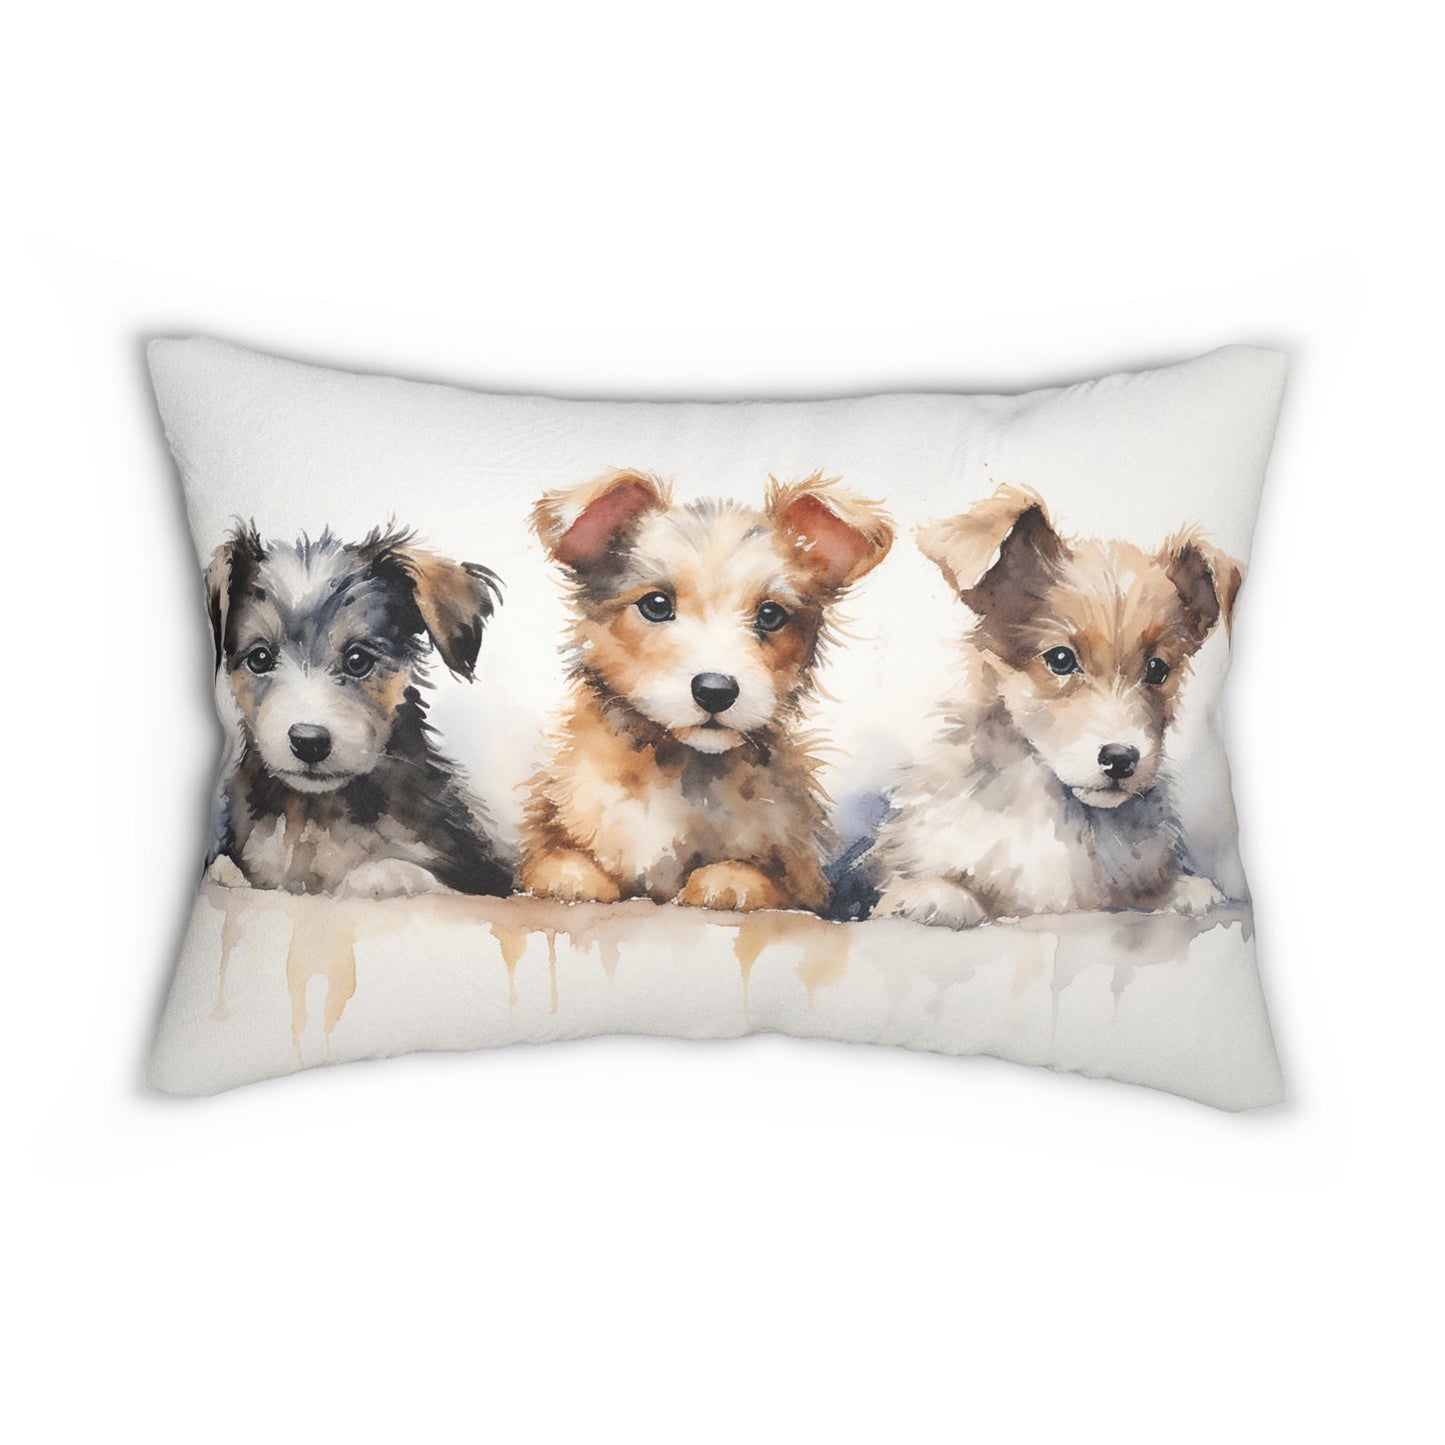 Jack Russell Puppy Dogs Lumbar Pillow, Lovely Adorable Puppies for your Decor, Unique Home Decor Accent Pillow, Elegant enough for Any Decor - FlooredByArt